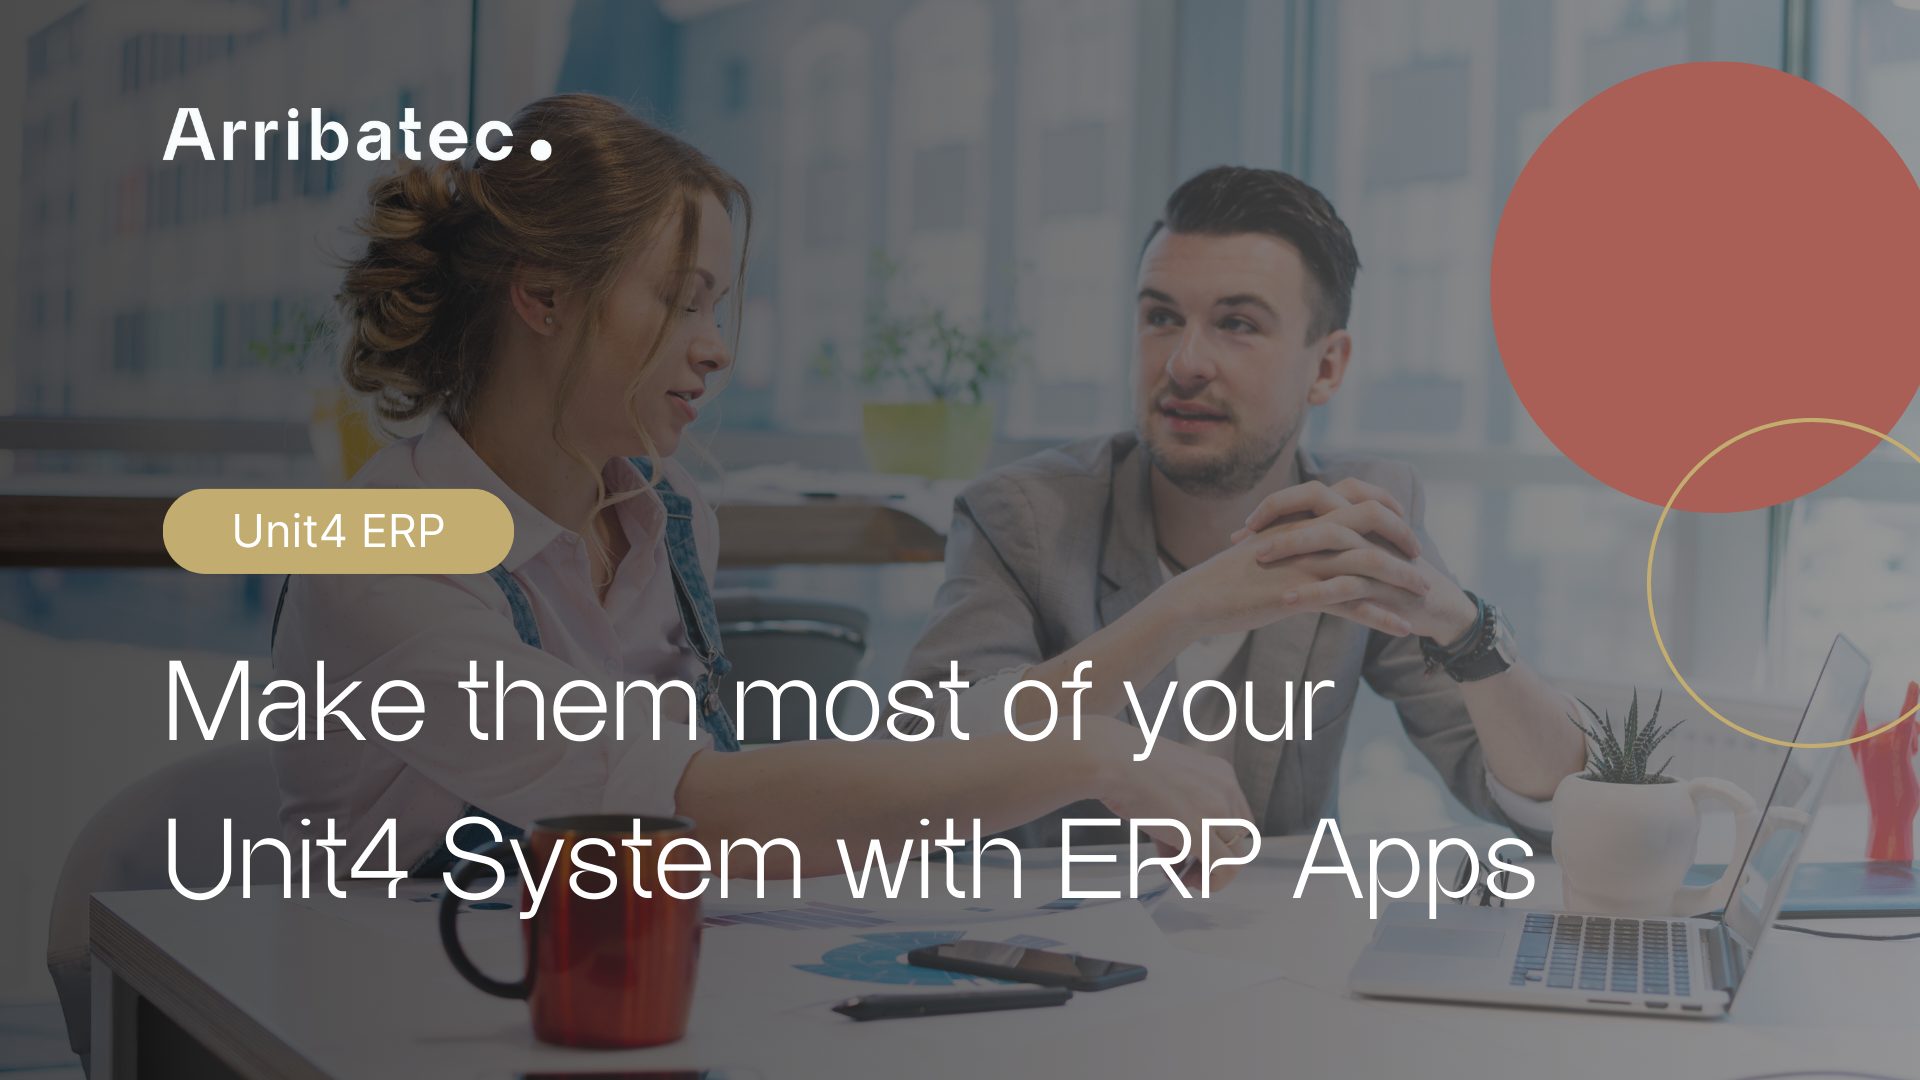 Save considerable HR costs and time with our self-service web portal that is integrated with Unit4 ERP (Agresso).